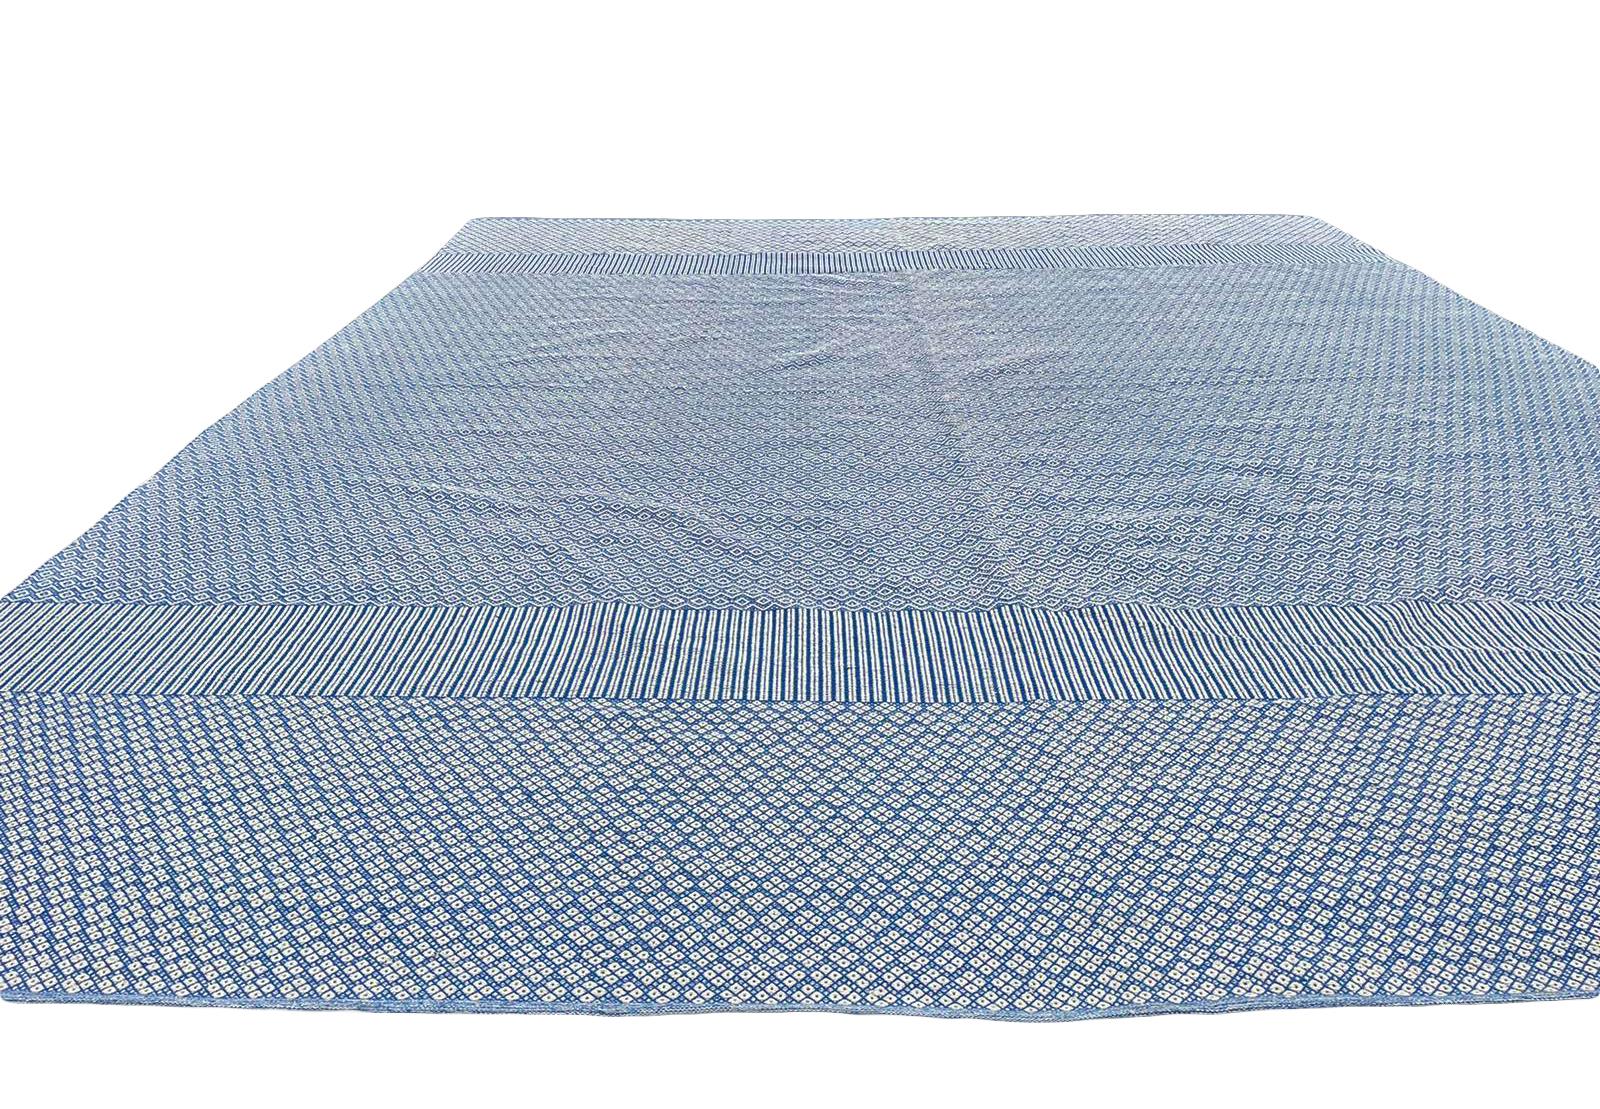 Oversized Blue and White Flat-Weave Indian Kilim by Gordian Rugs 10